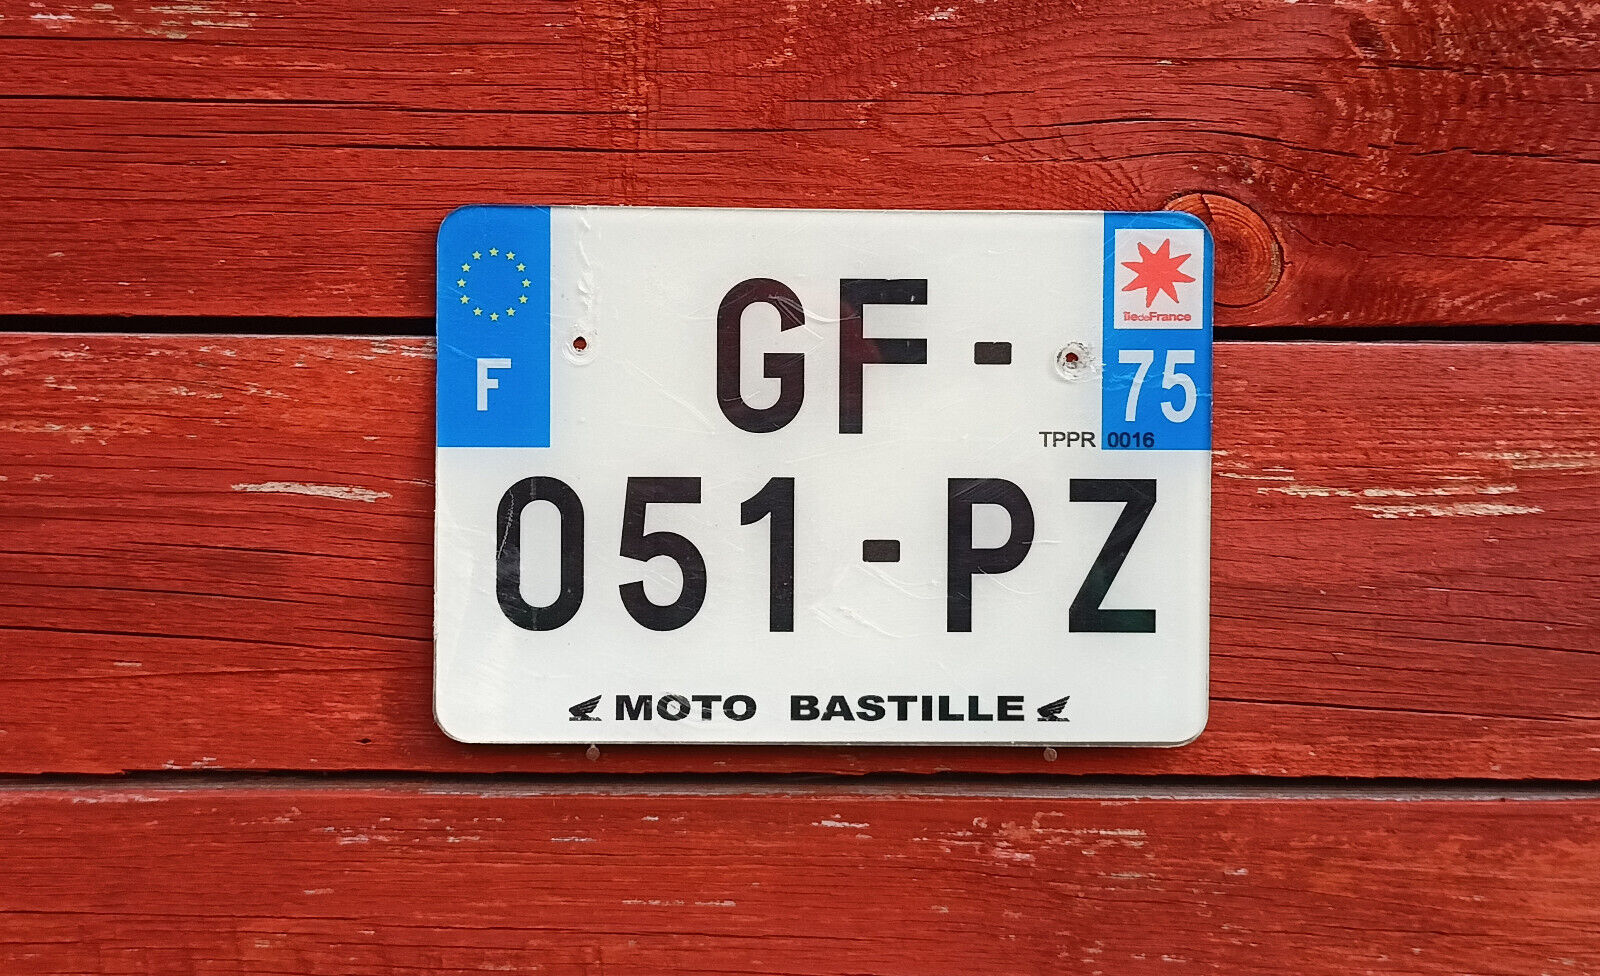 FRANCE/FRENCH Motorcycle License Plate from Europe